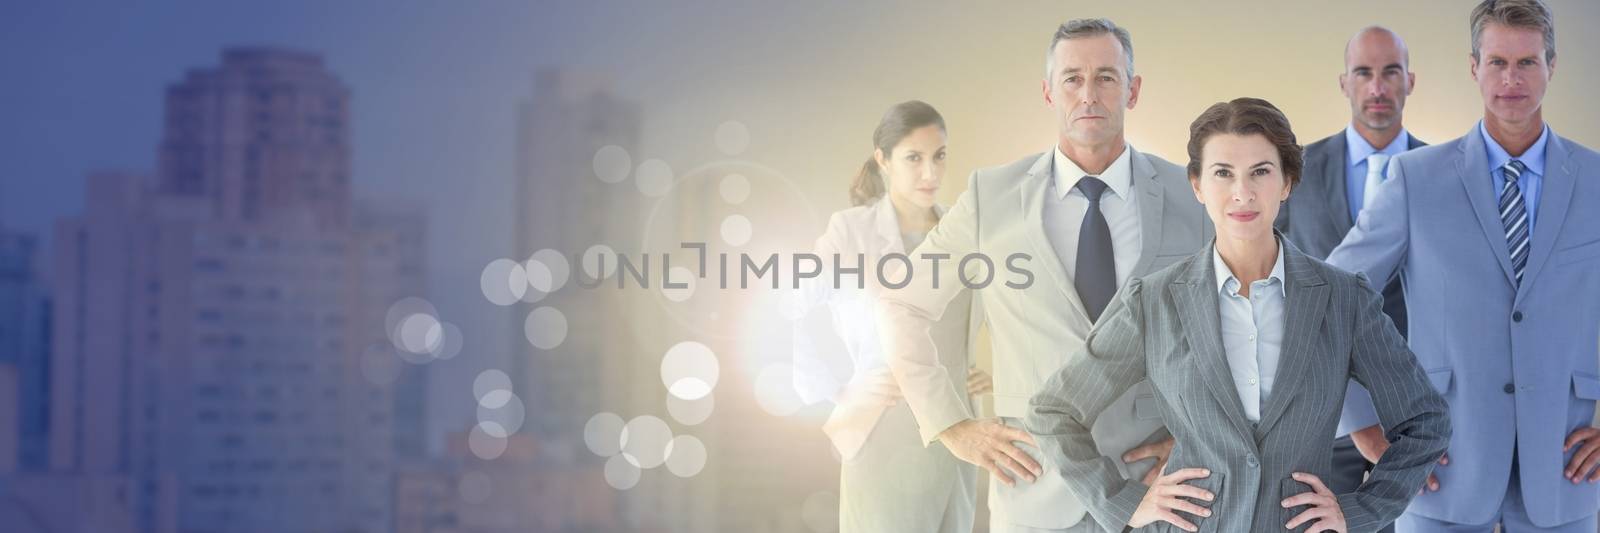 Digital composite of Business people and City buildings with flare light source